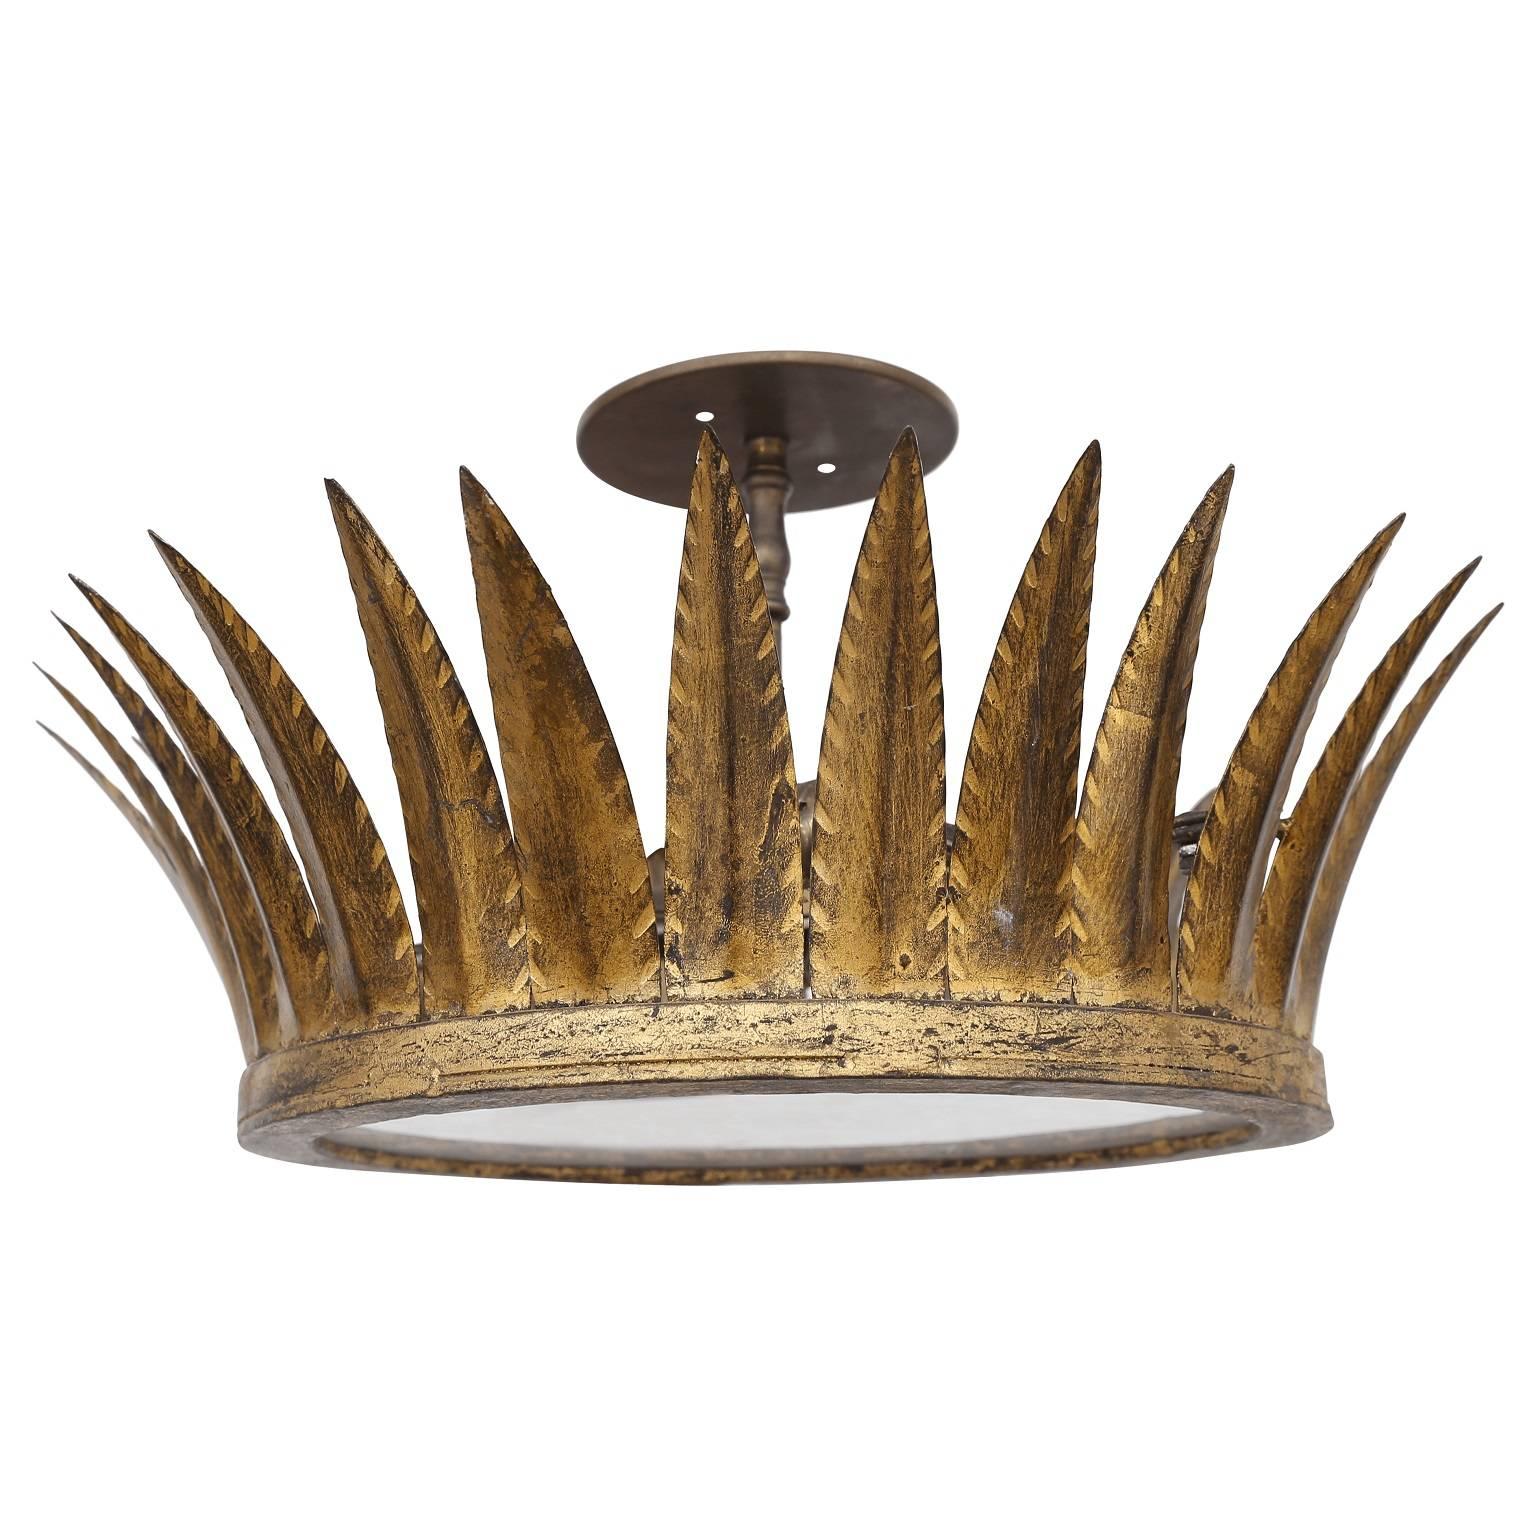 Gilded crown light fixture, flush mount for low ceilings, newly wired with two Edison base sockets and frosted glass.